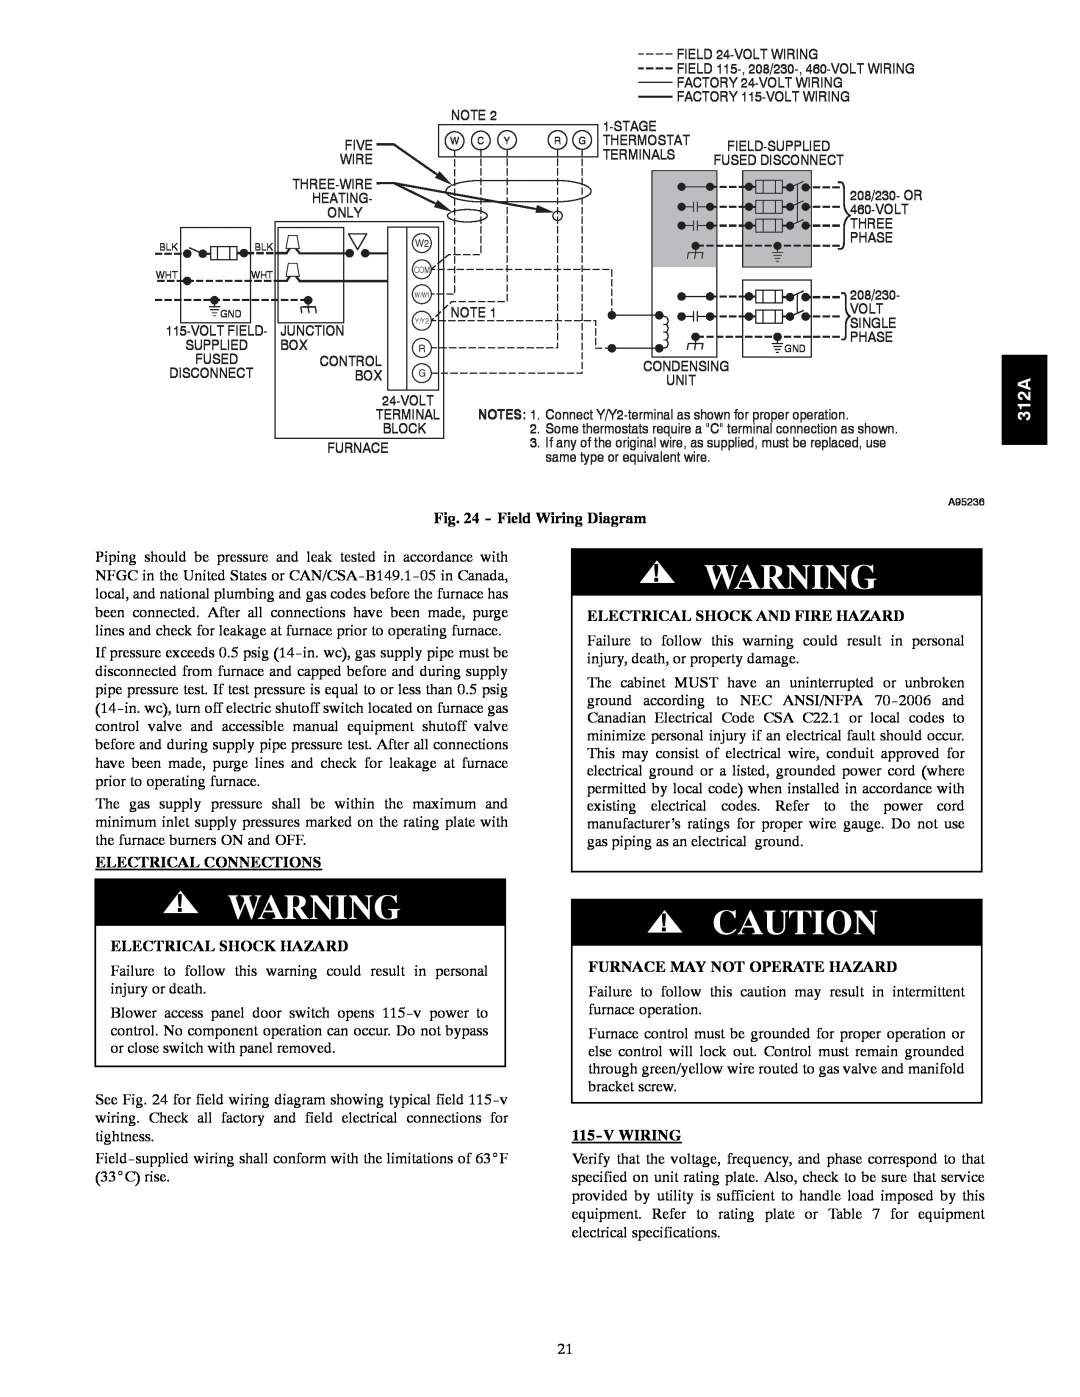 Bryant 120 Field Wiring Diagram, Electrical Connections, Electrical Shock And Fire Hazard, Electrical Shock Hazard, 312A 